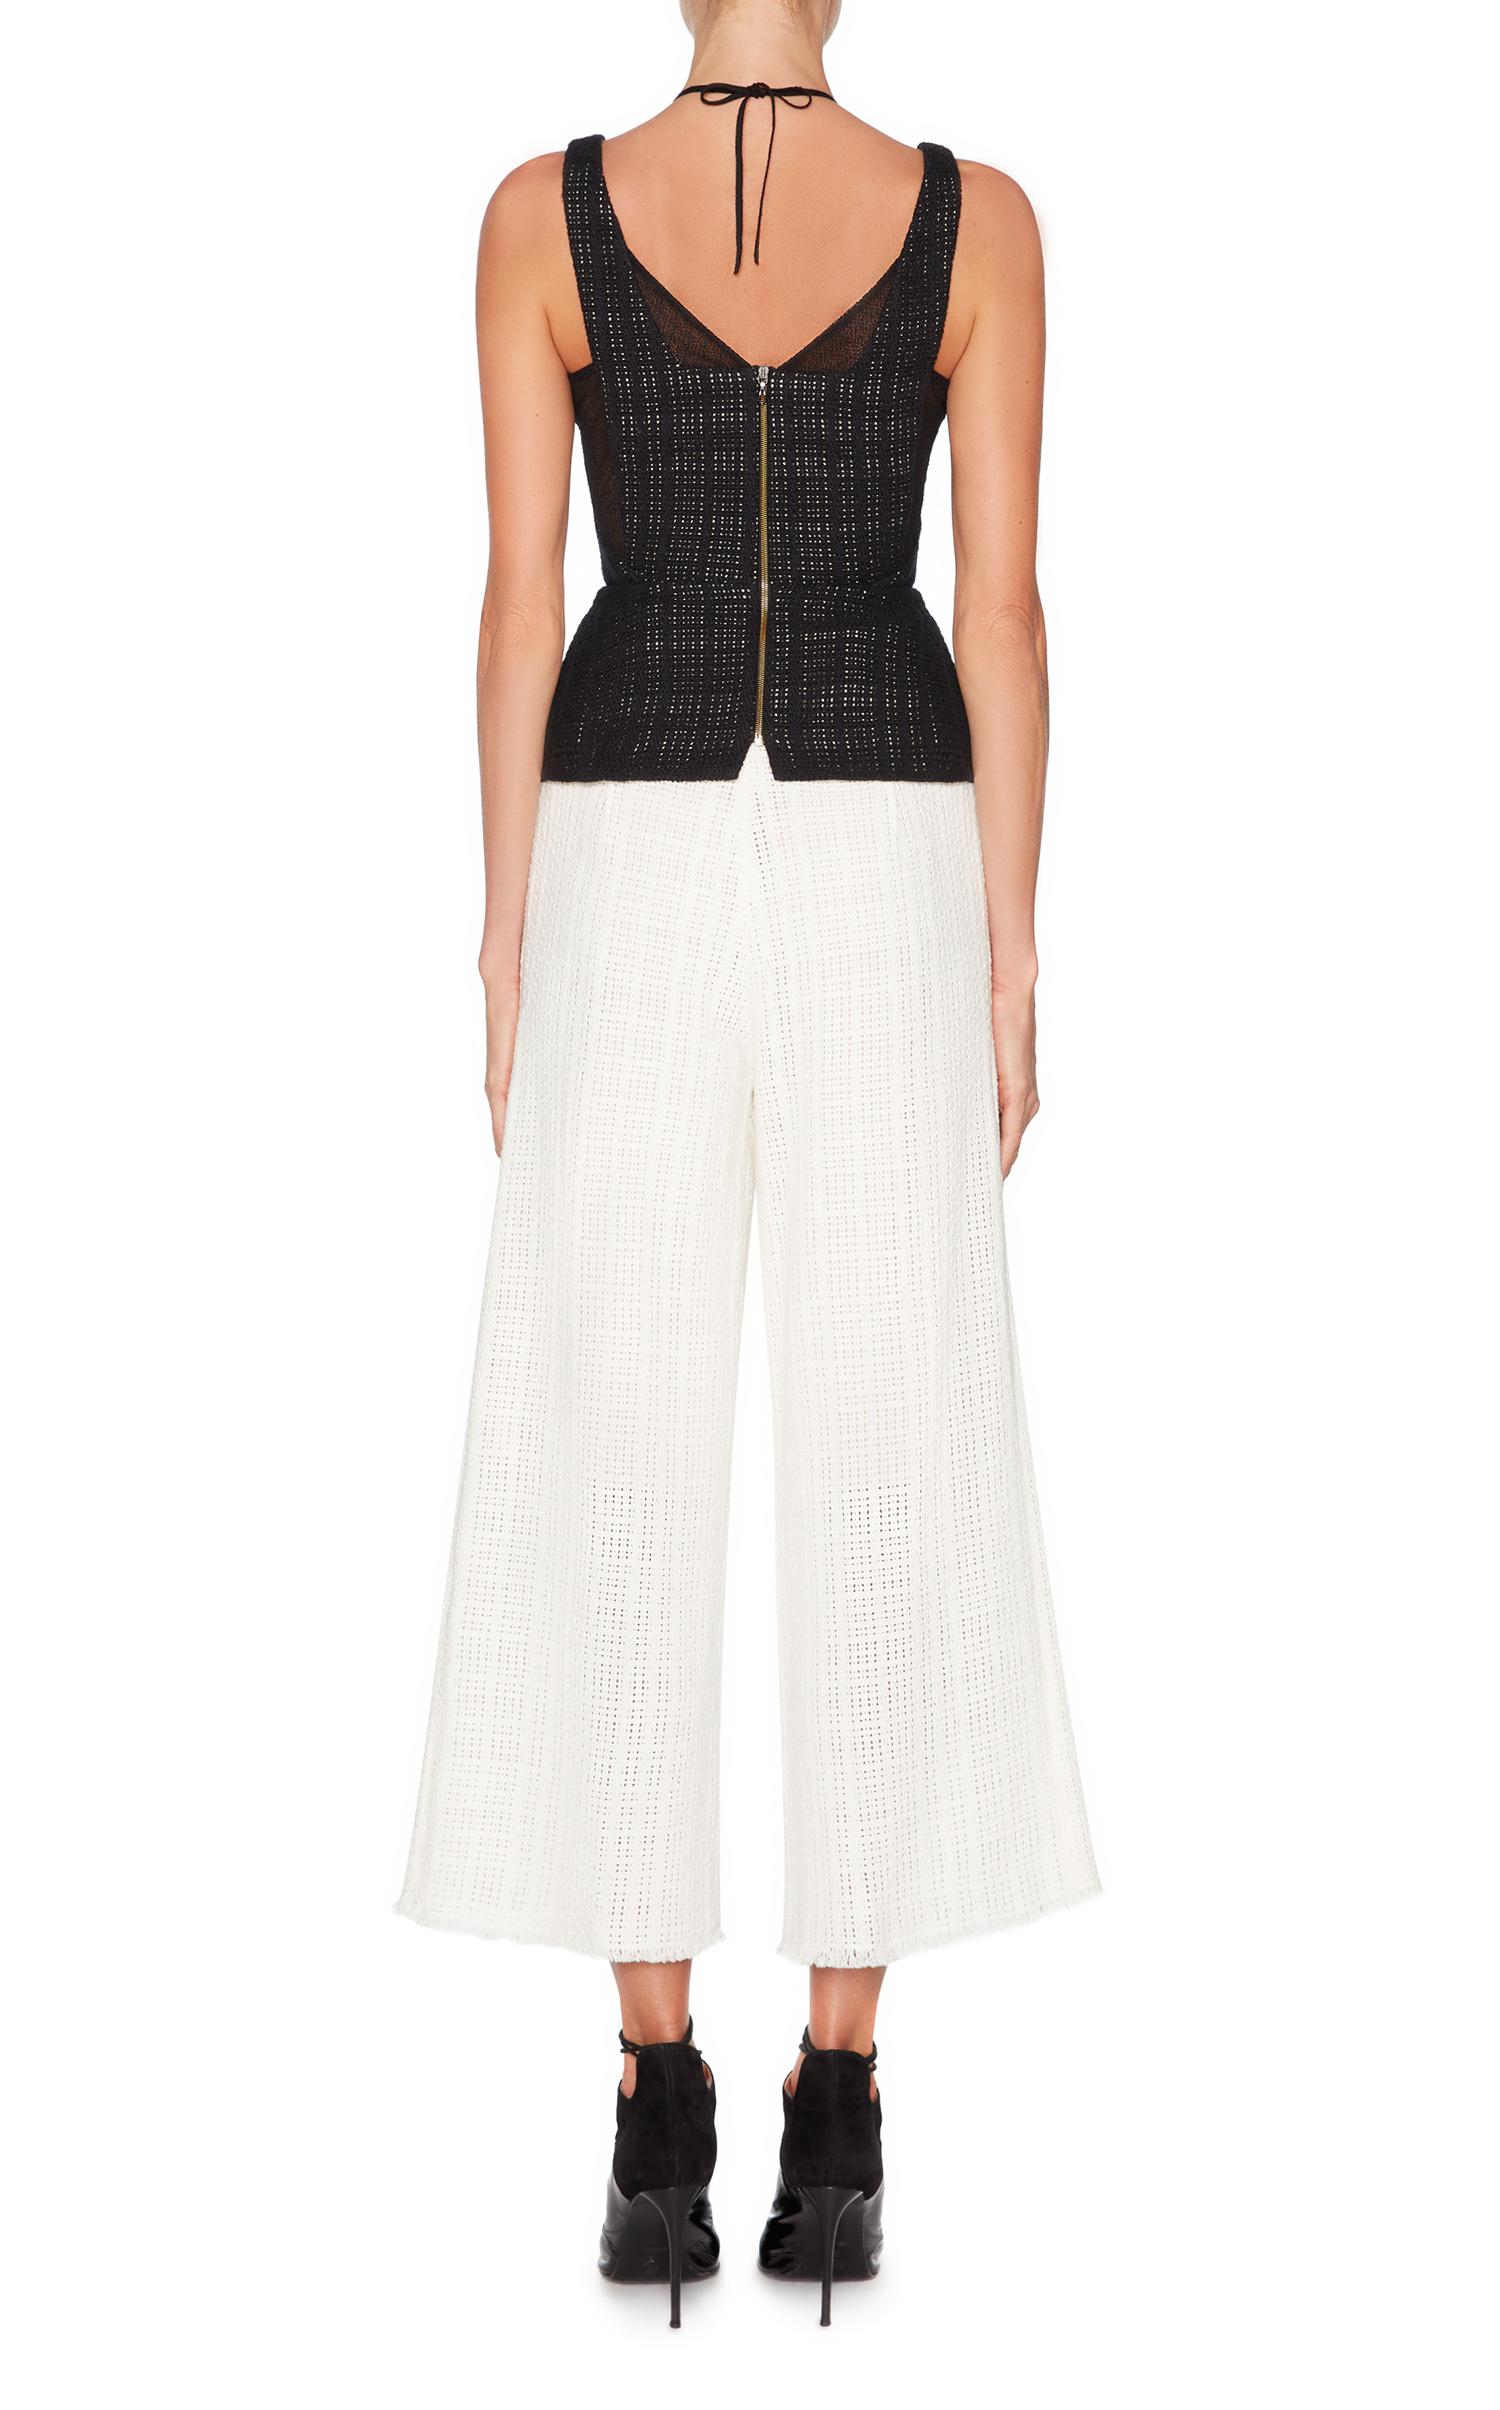 Lyst - Roland Mouret Cottingham Top in White